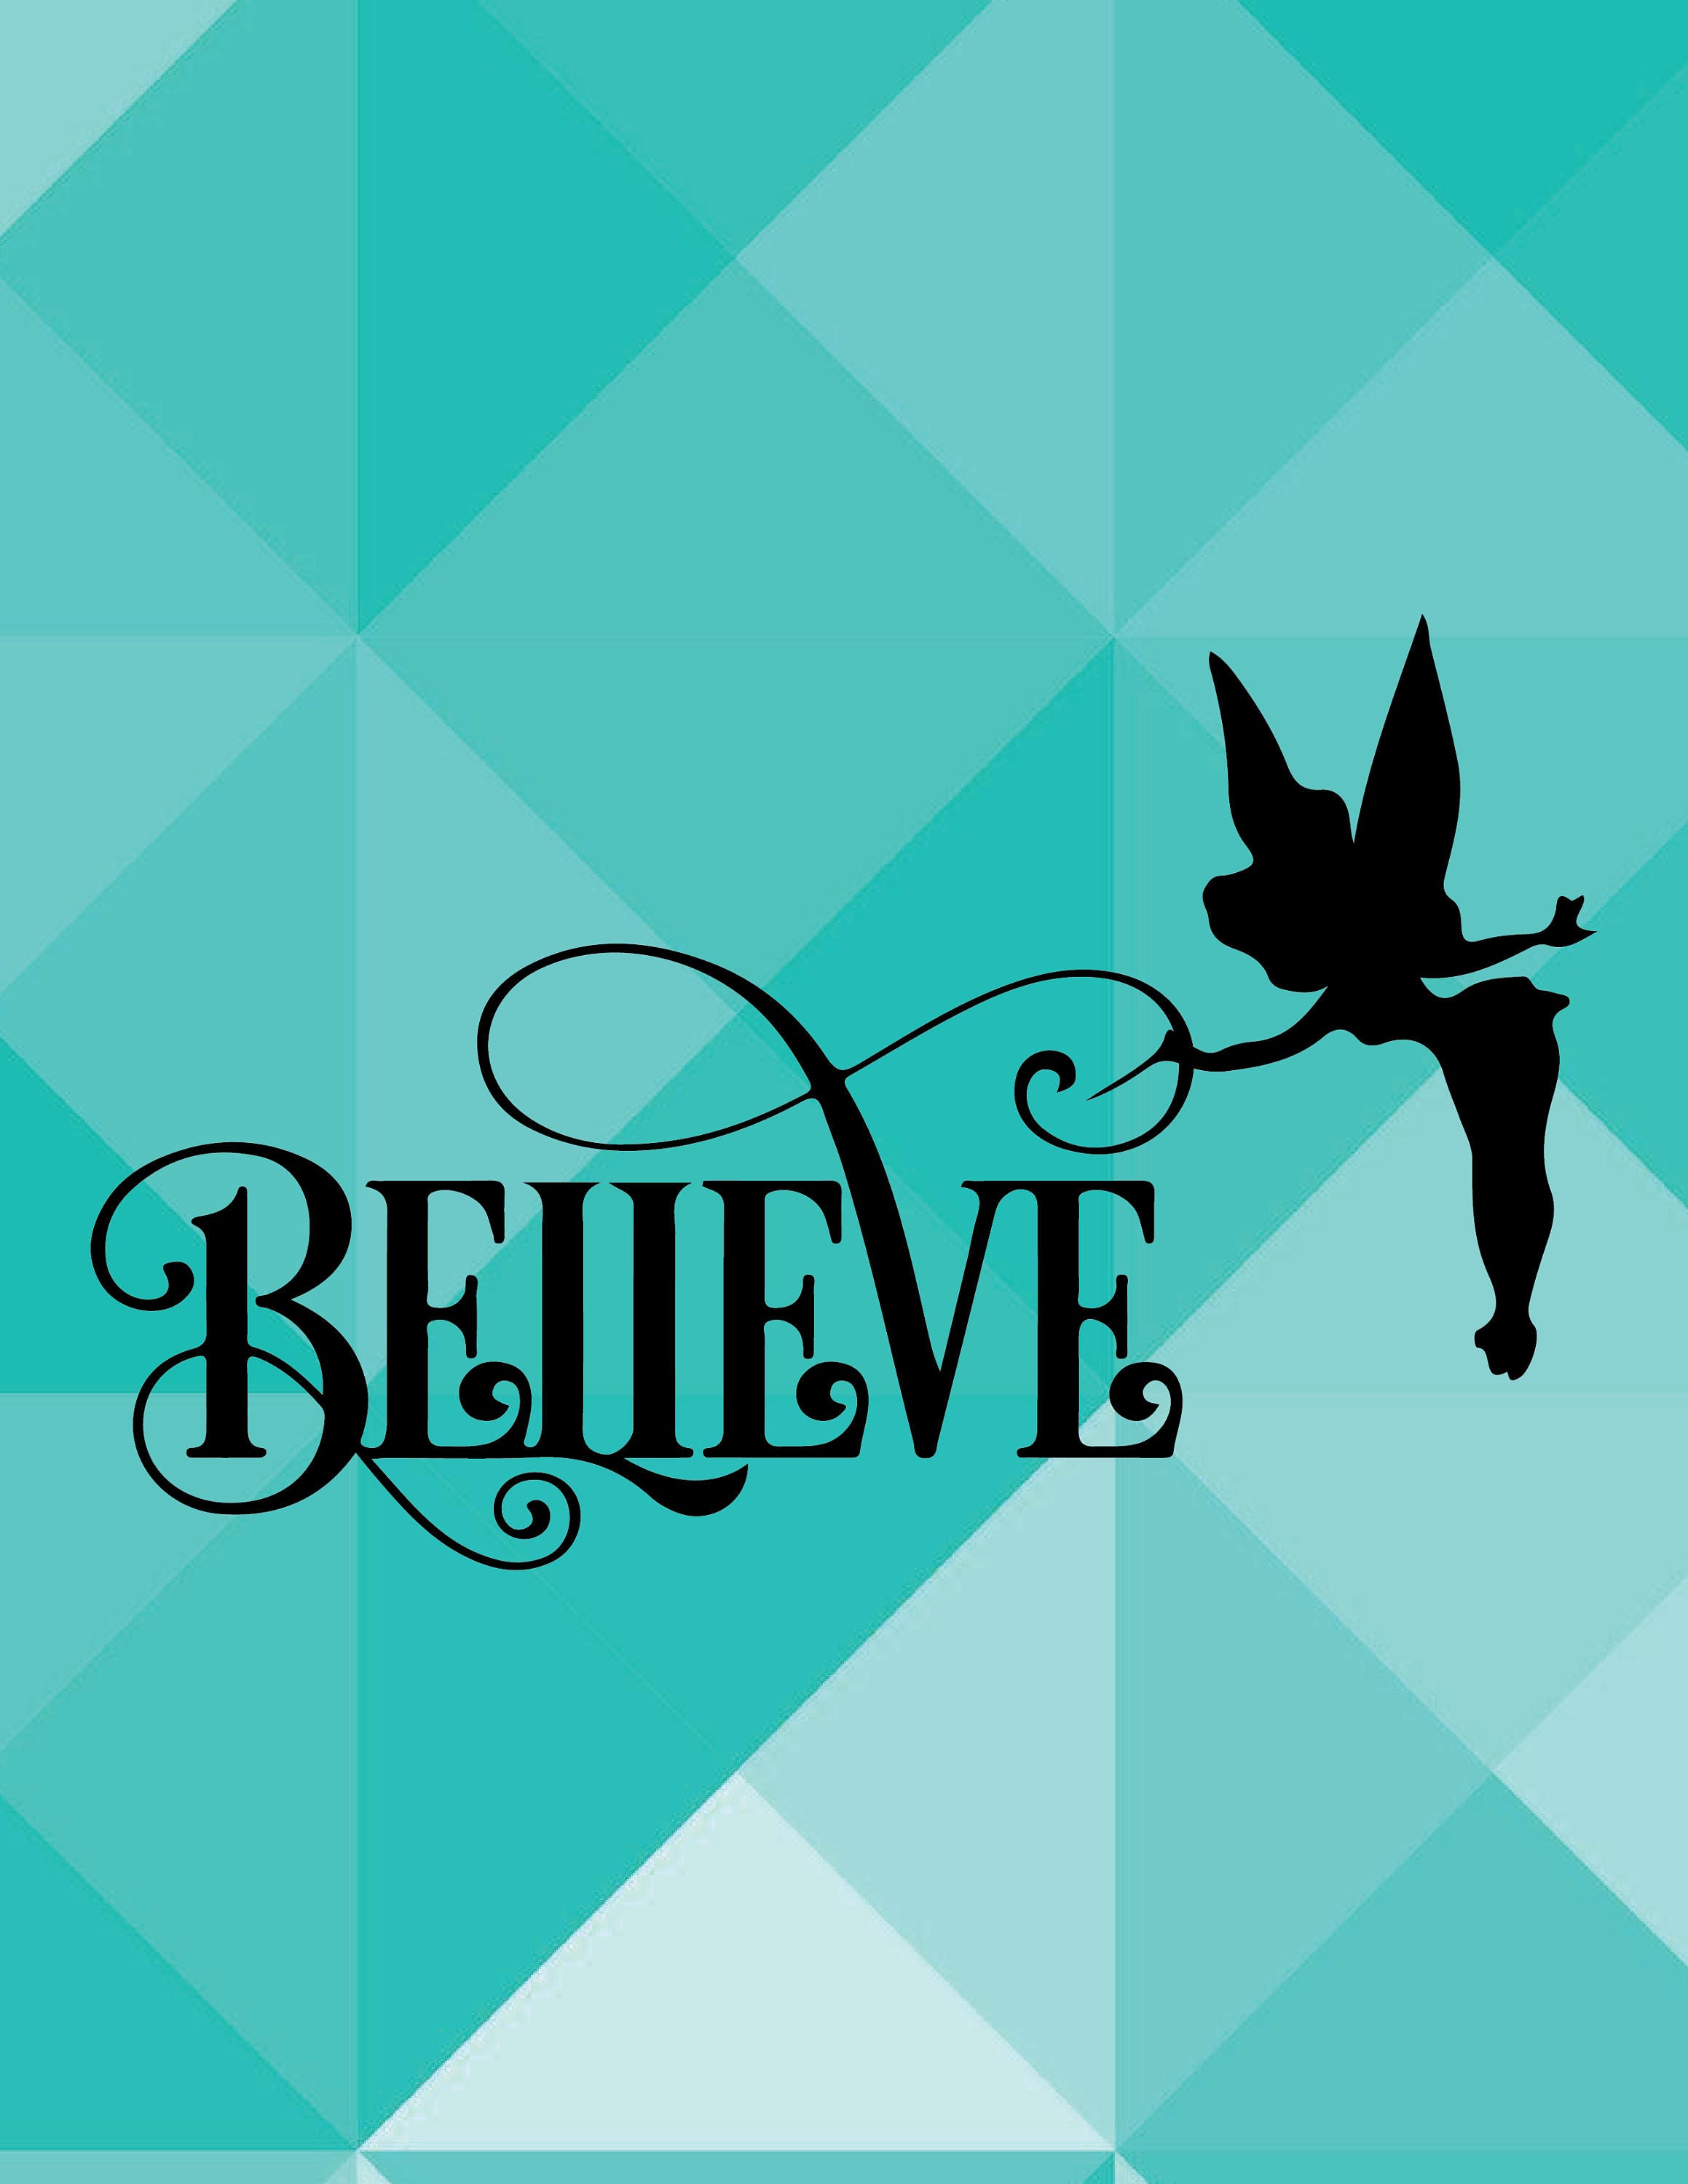 Download Tinkerbell Believe, Fairy Inspired Paper Cut File for ...